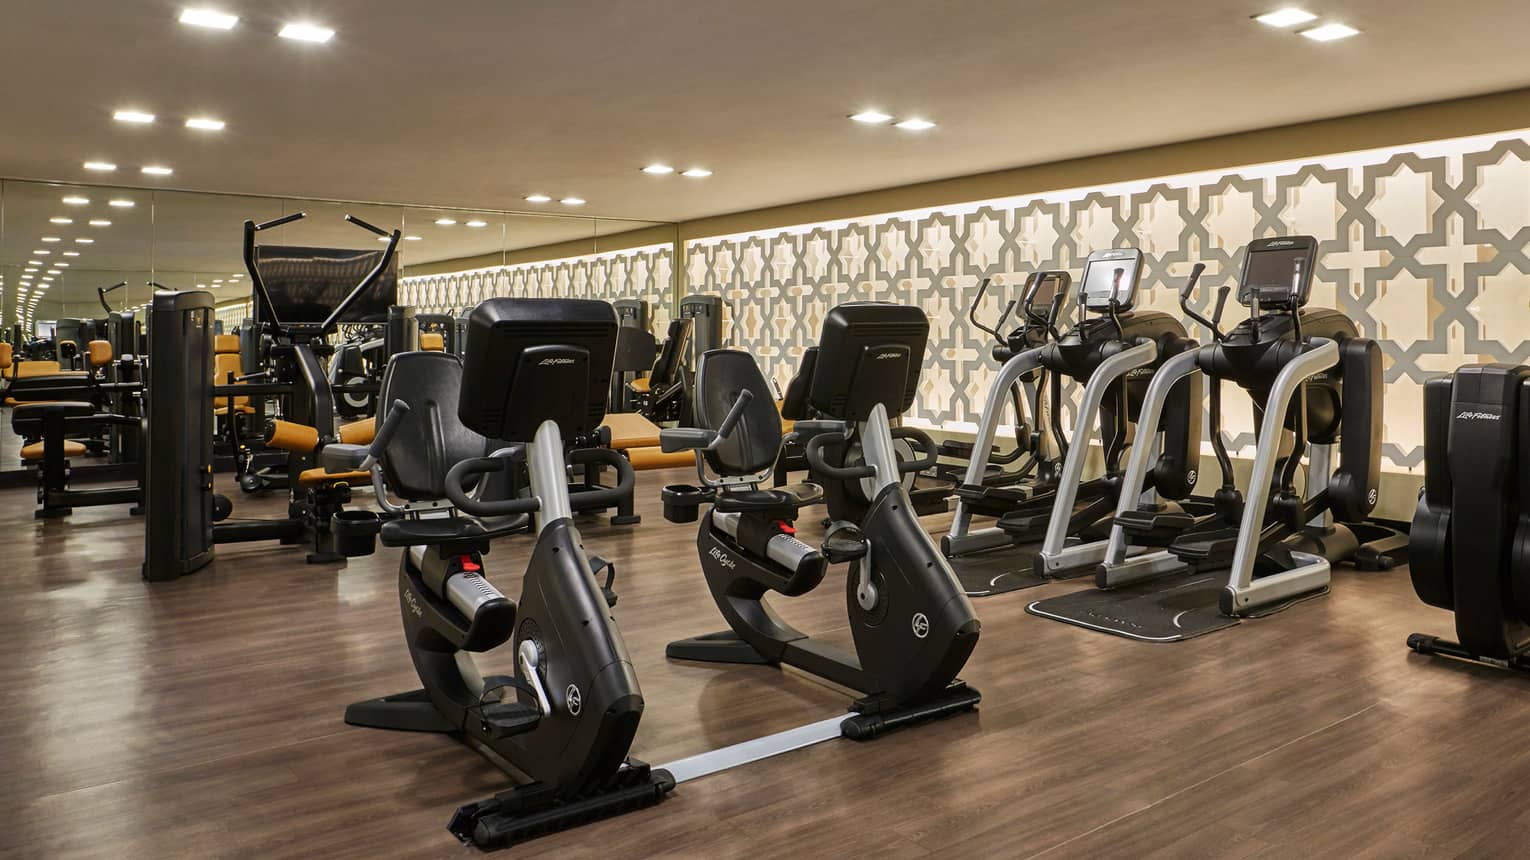 Rows of cardio machines in dimly-lit fitness room with wood floors